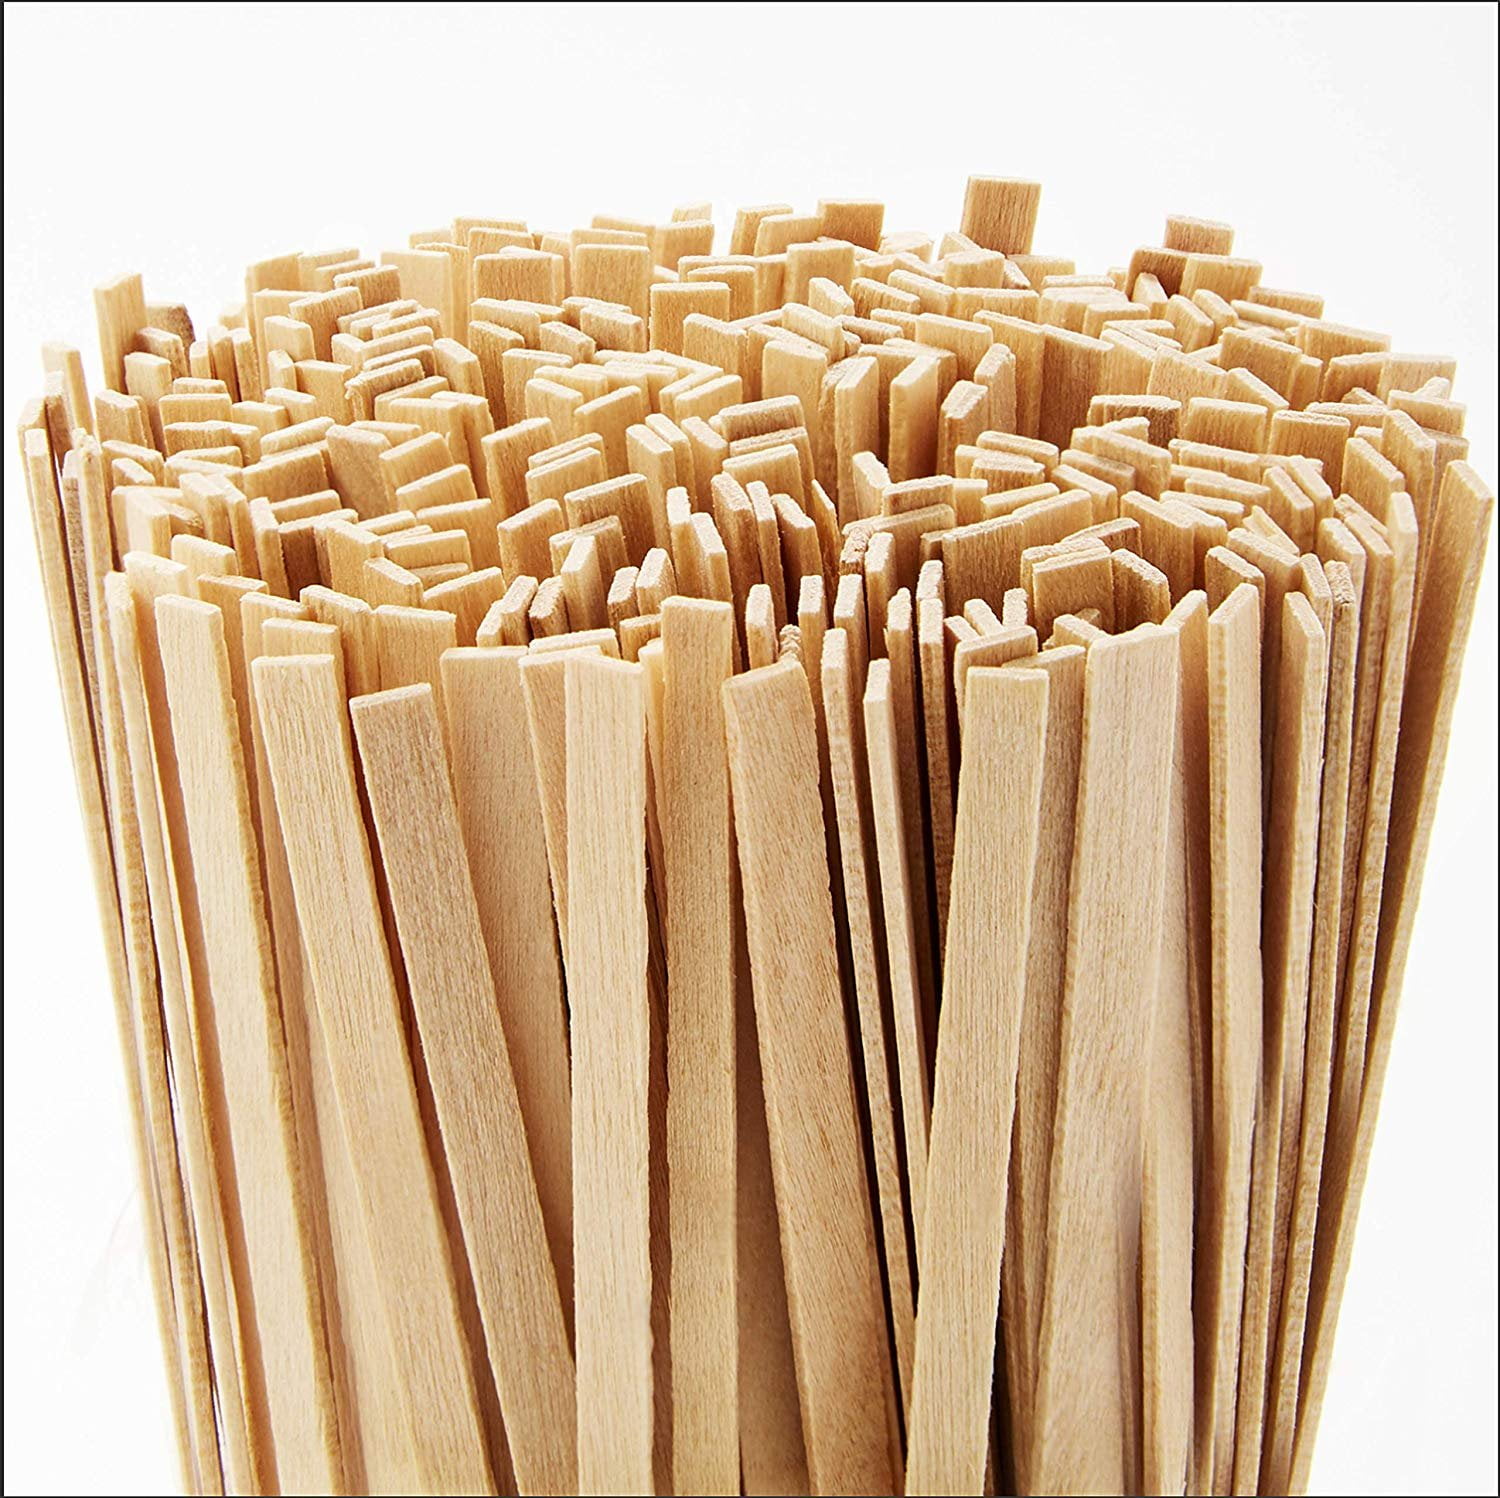 5.5 inch compostable Biodegradable - eco-Friendly 1000 stirrers Bakery Direct Birchwood Wooden Drink Tea/Coffee Stirrers 